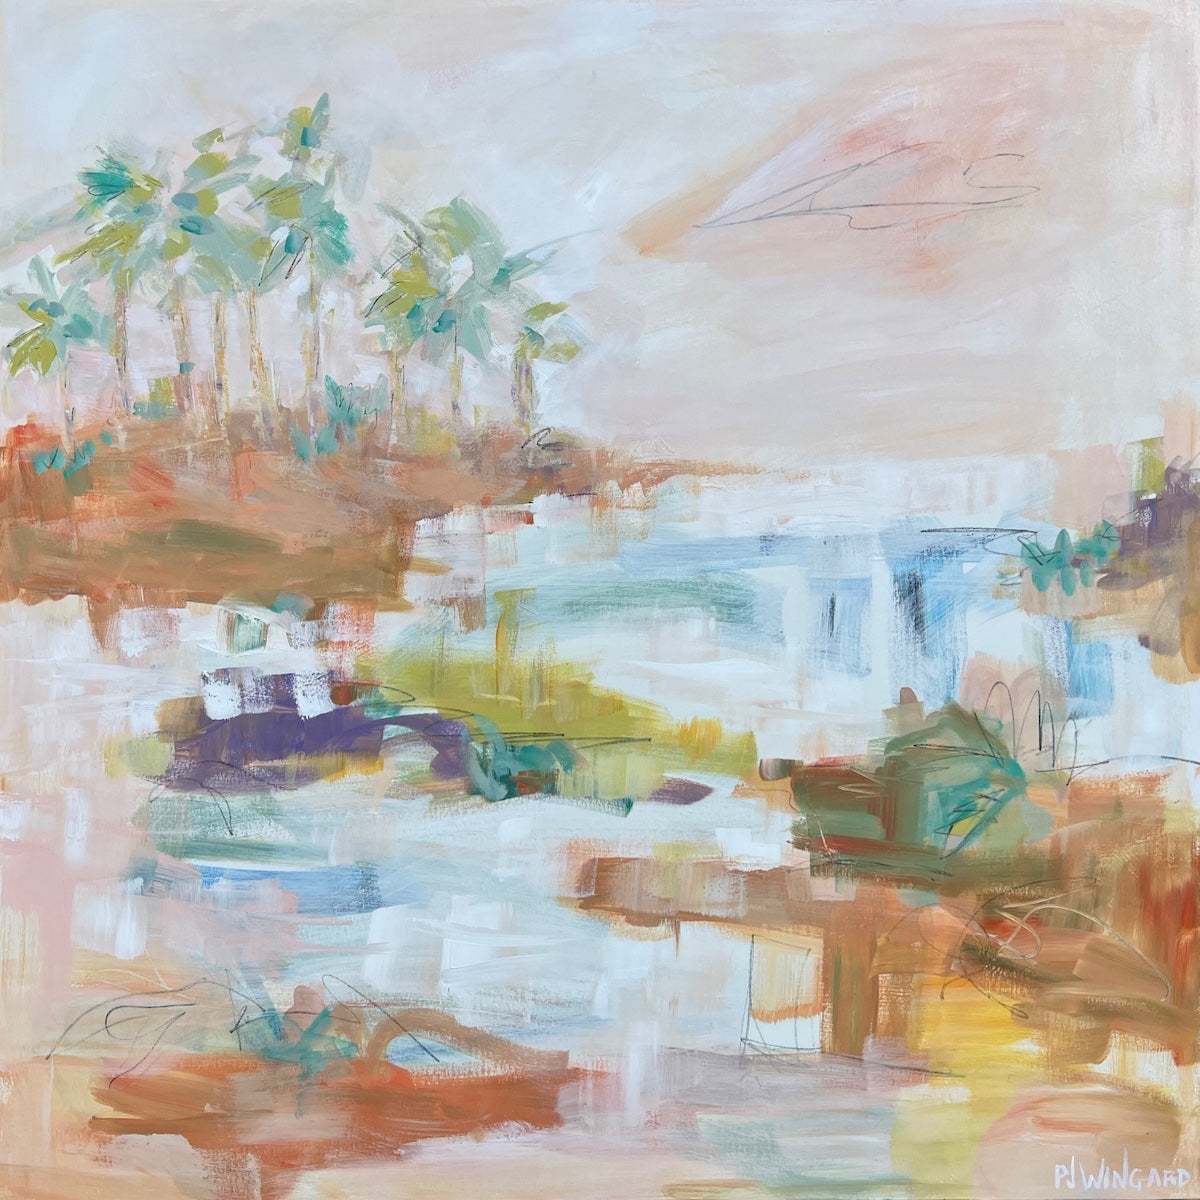 Abstract coastal painting by Pamela Wingard. 48" x 48". Gallery depth canvas with side painted. Wired and ready to hang.